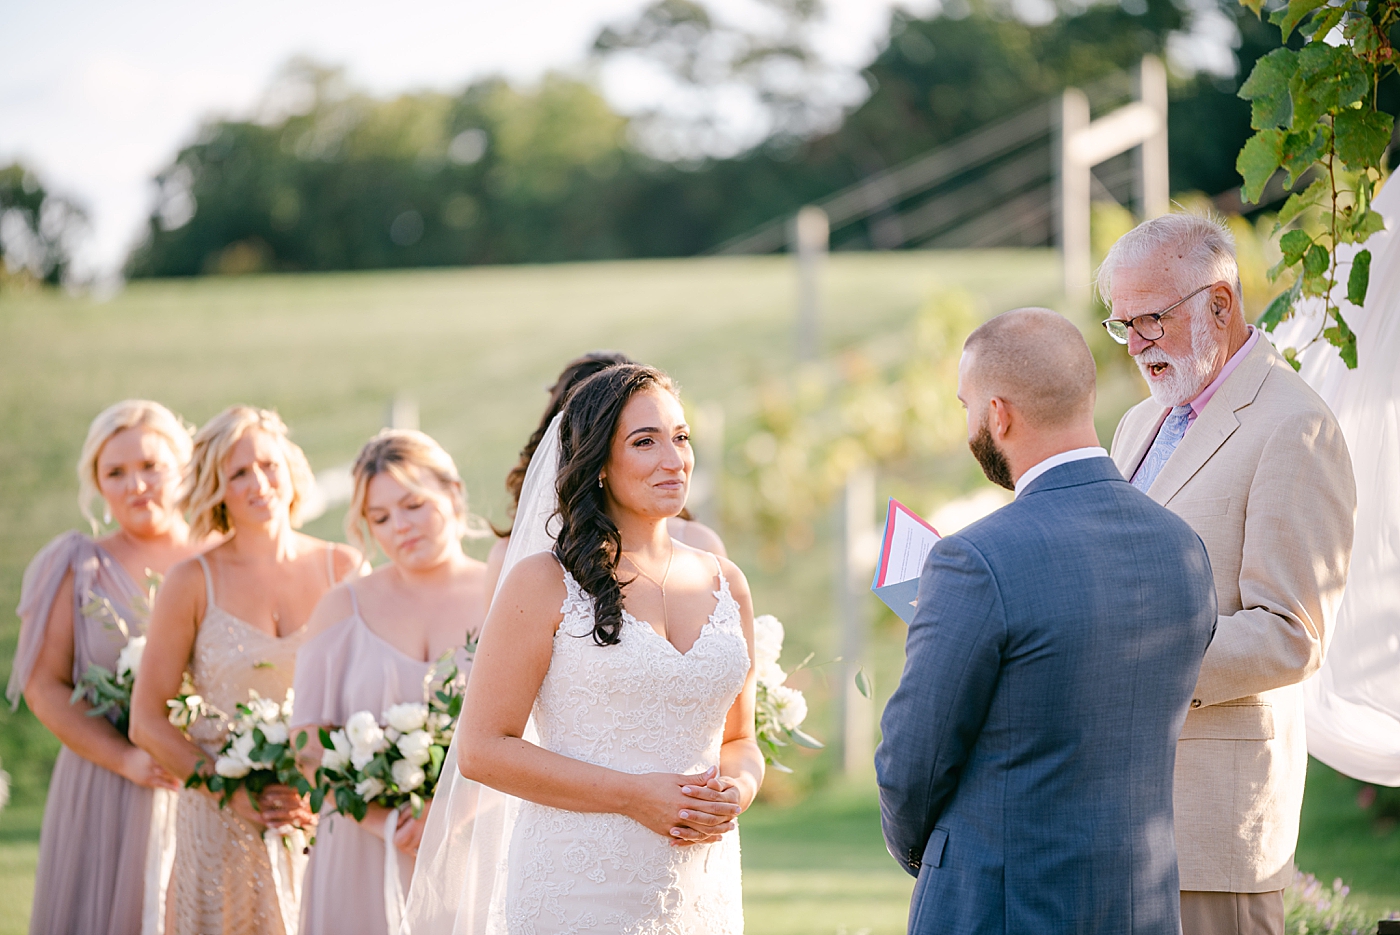 Bride smiling at her groom during their vows | Photo by Hope Helmuth Photography